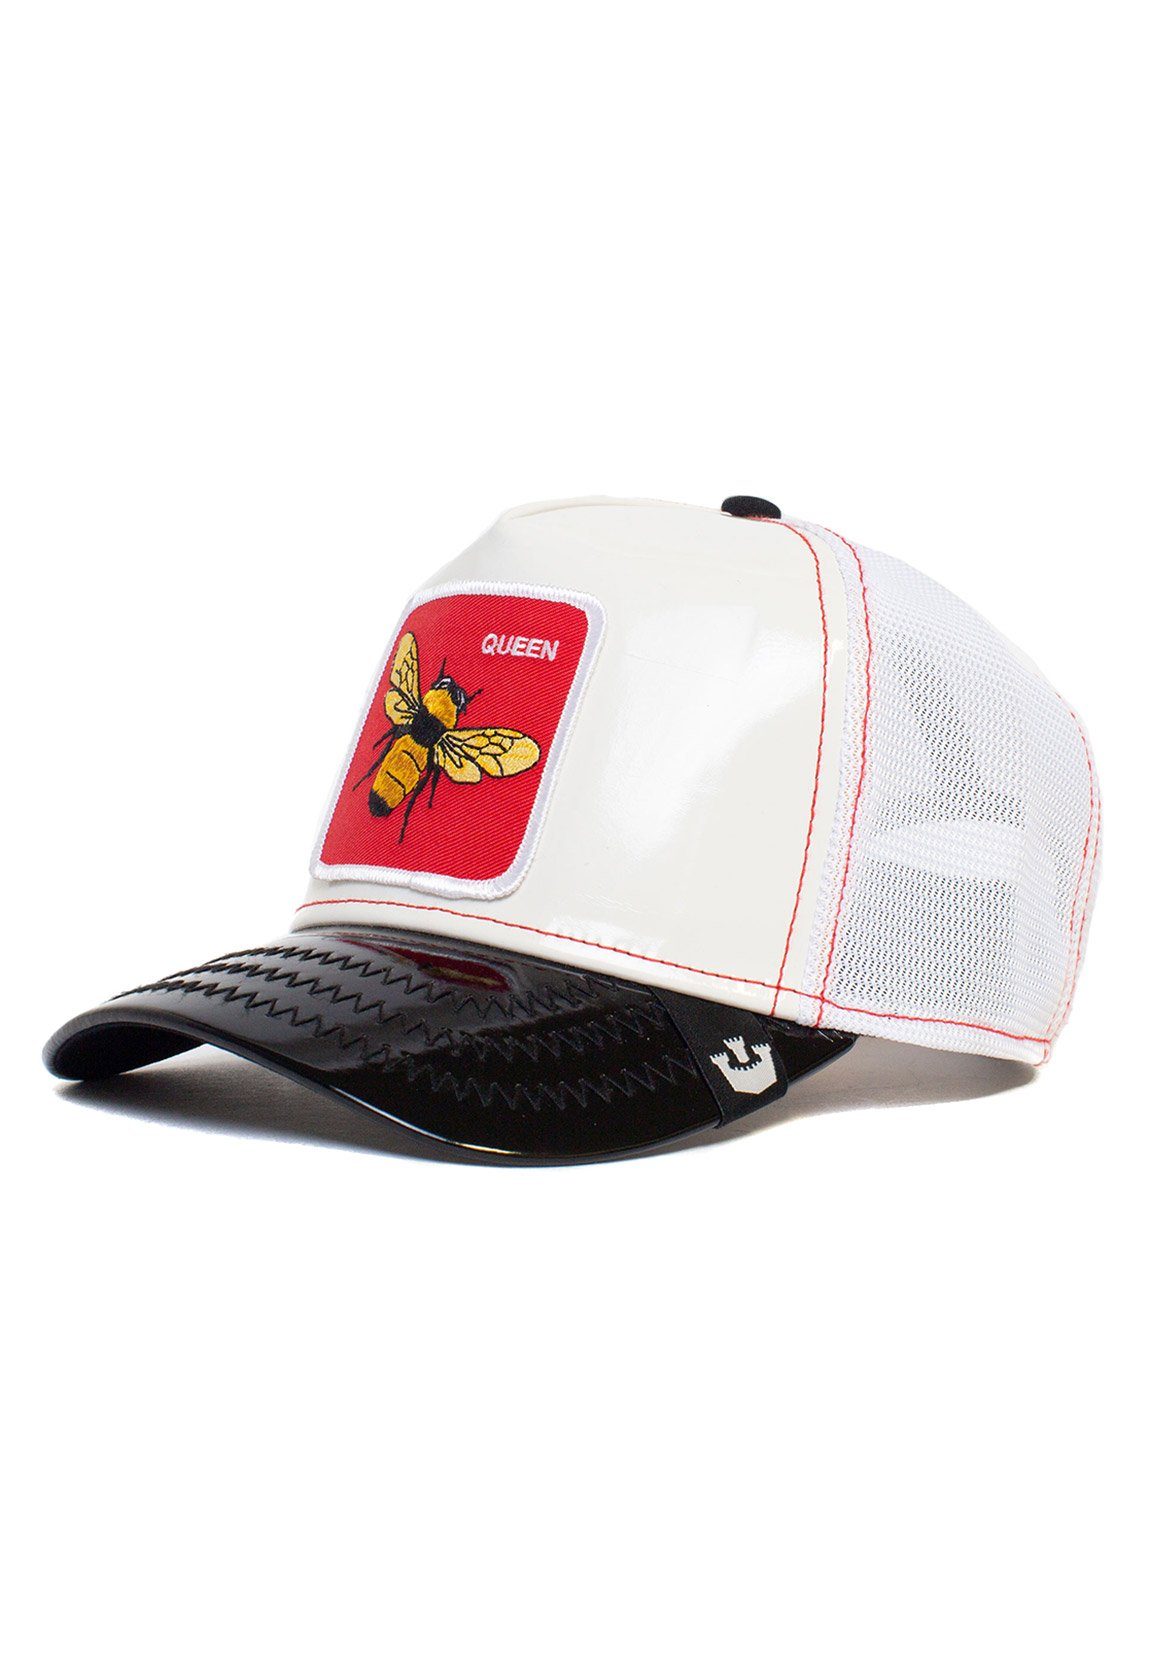 GOORIN Bros. Trucker Cap Goorin Bros. Trucker Cap THE RED QUEEN White Weiß